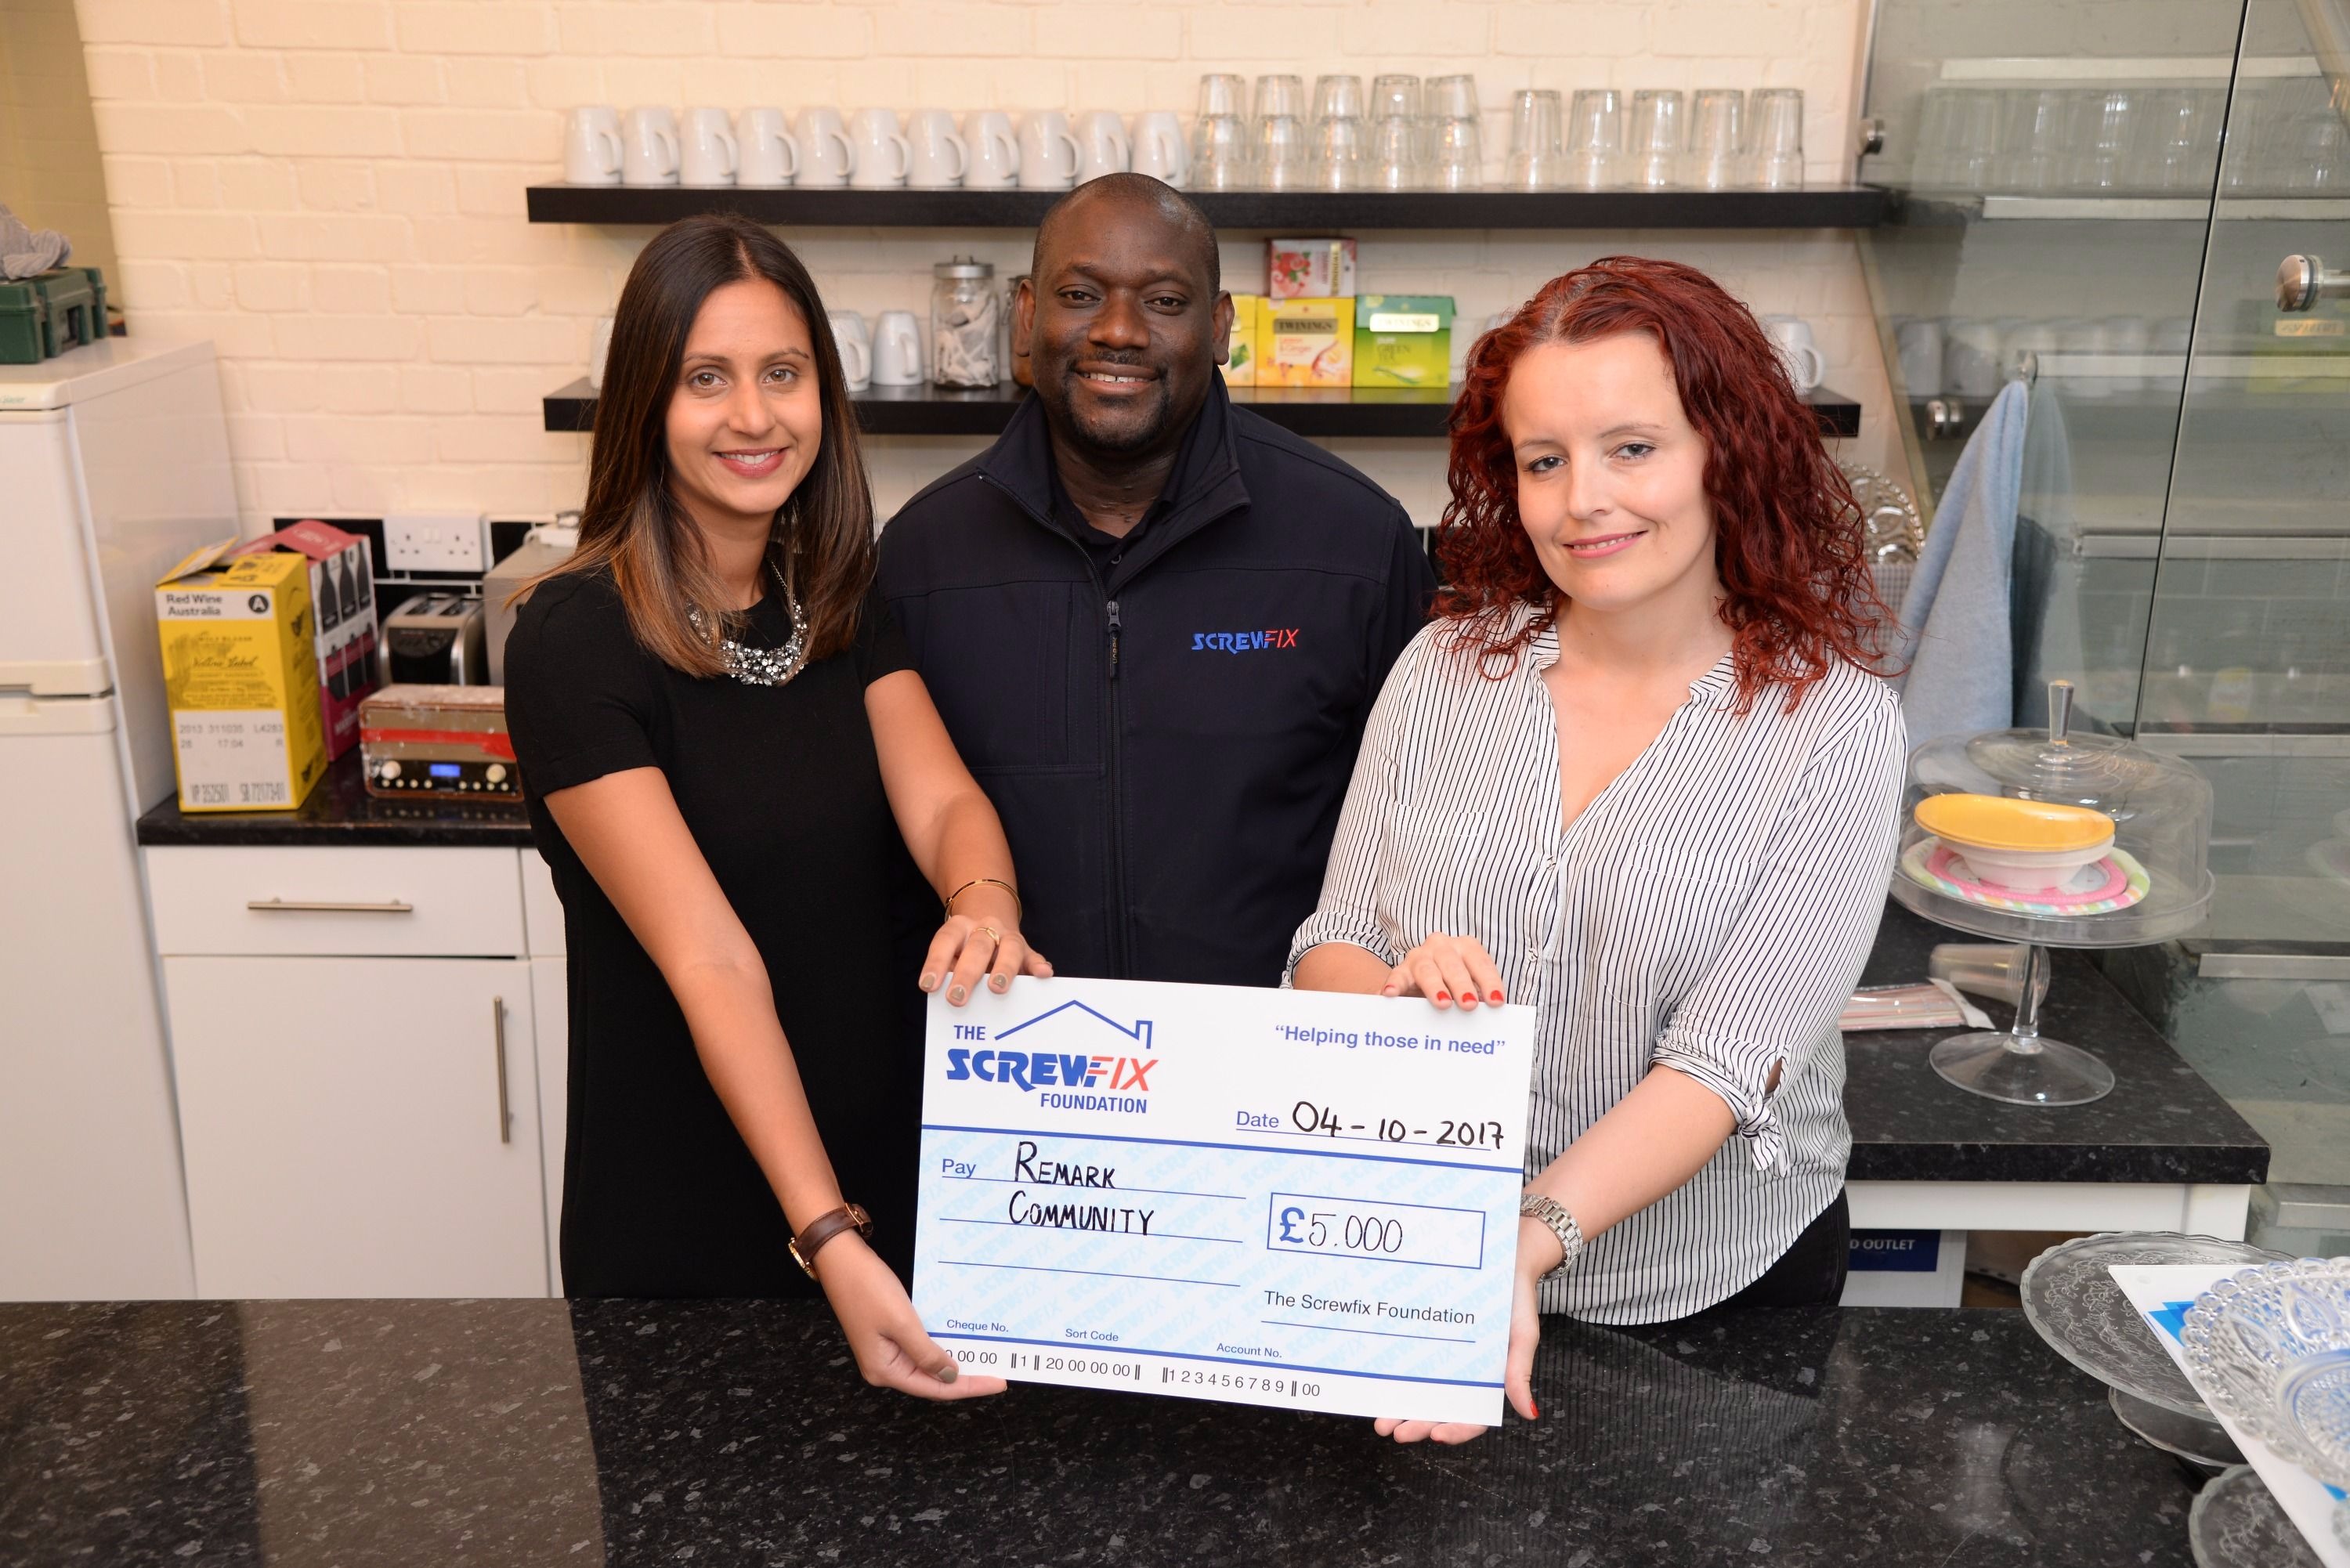 Remark! Community Gets a Helping Hand From The Screwfix Foundation